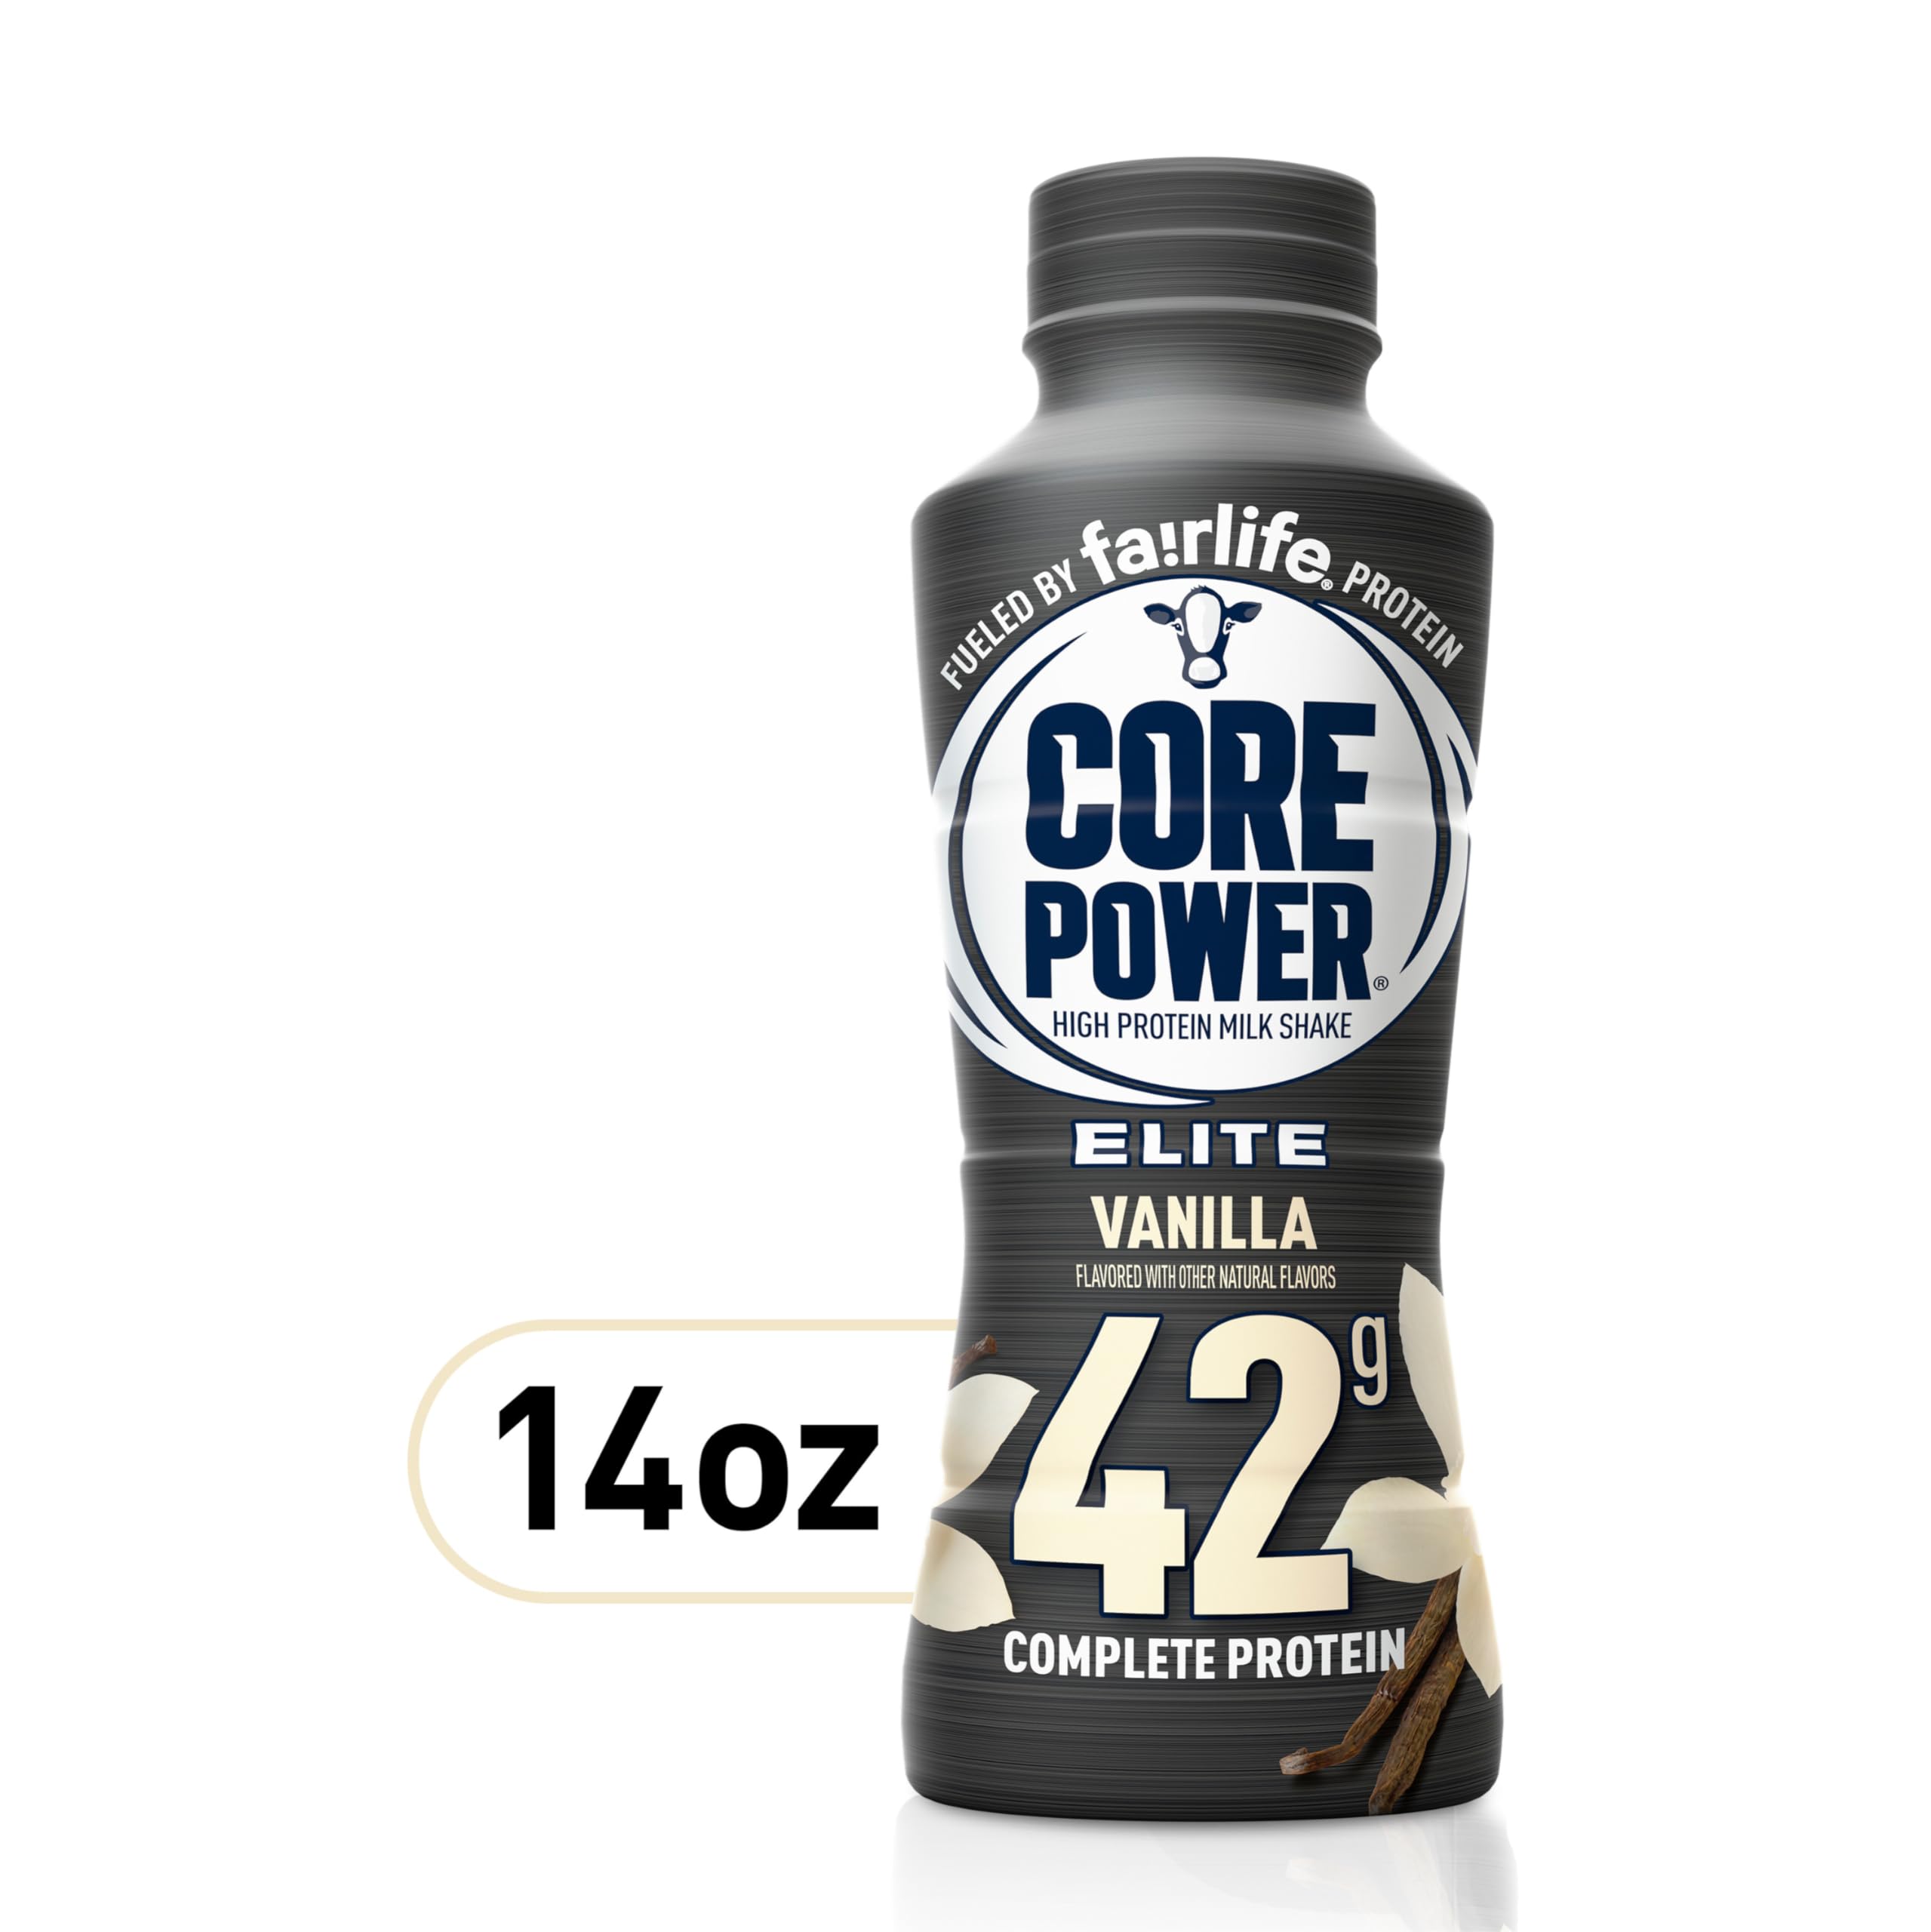 Core Power Fairlife Elite 42g High Protein Milk Shake, Ready To Drink for Workout Recovery, Vanilla, 14 Fl Oz (Pack of 12)